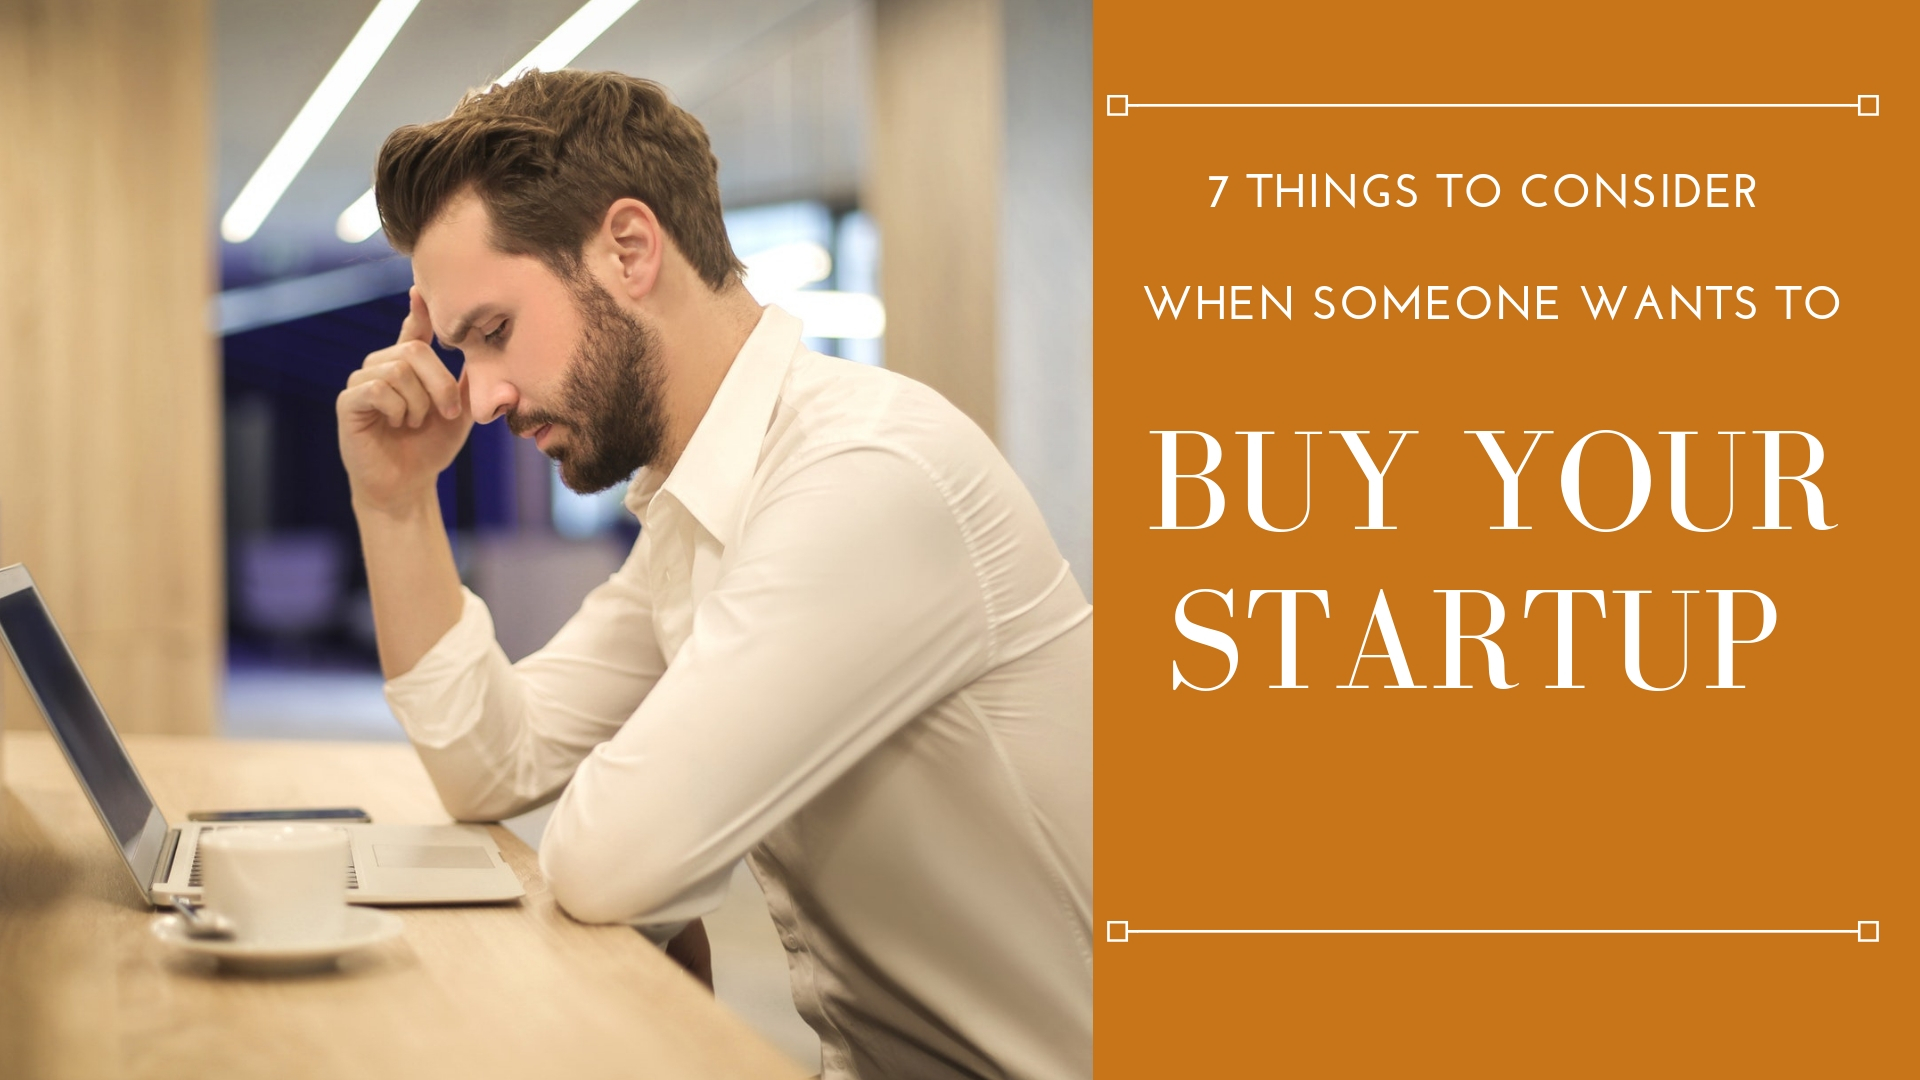 7 Things to Consider When Someone Wants to Buy Your Startup